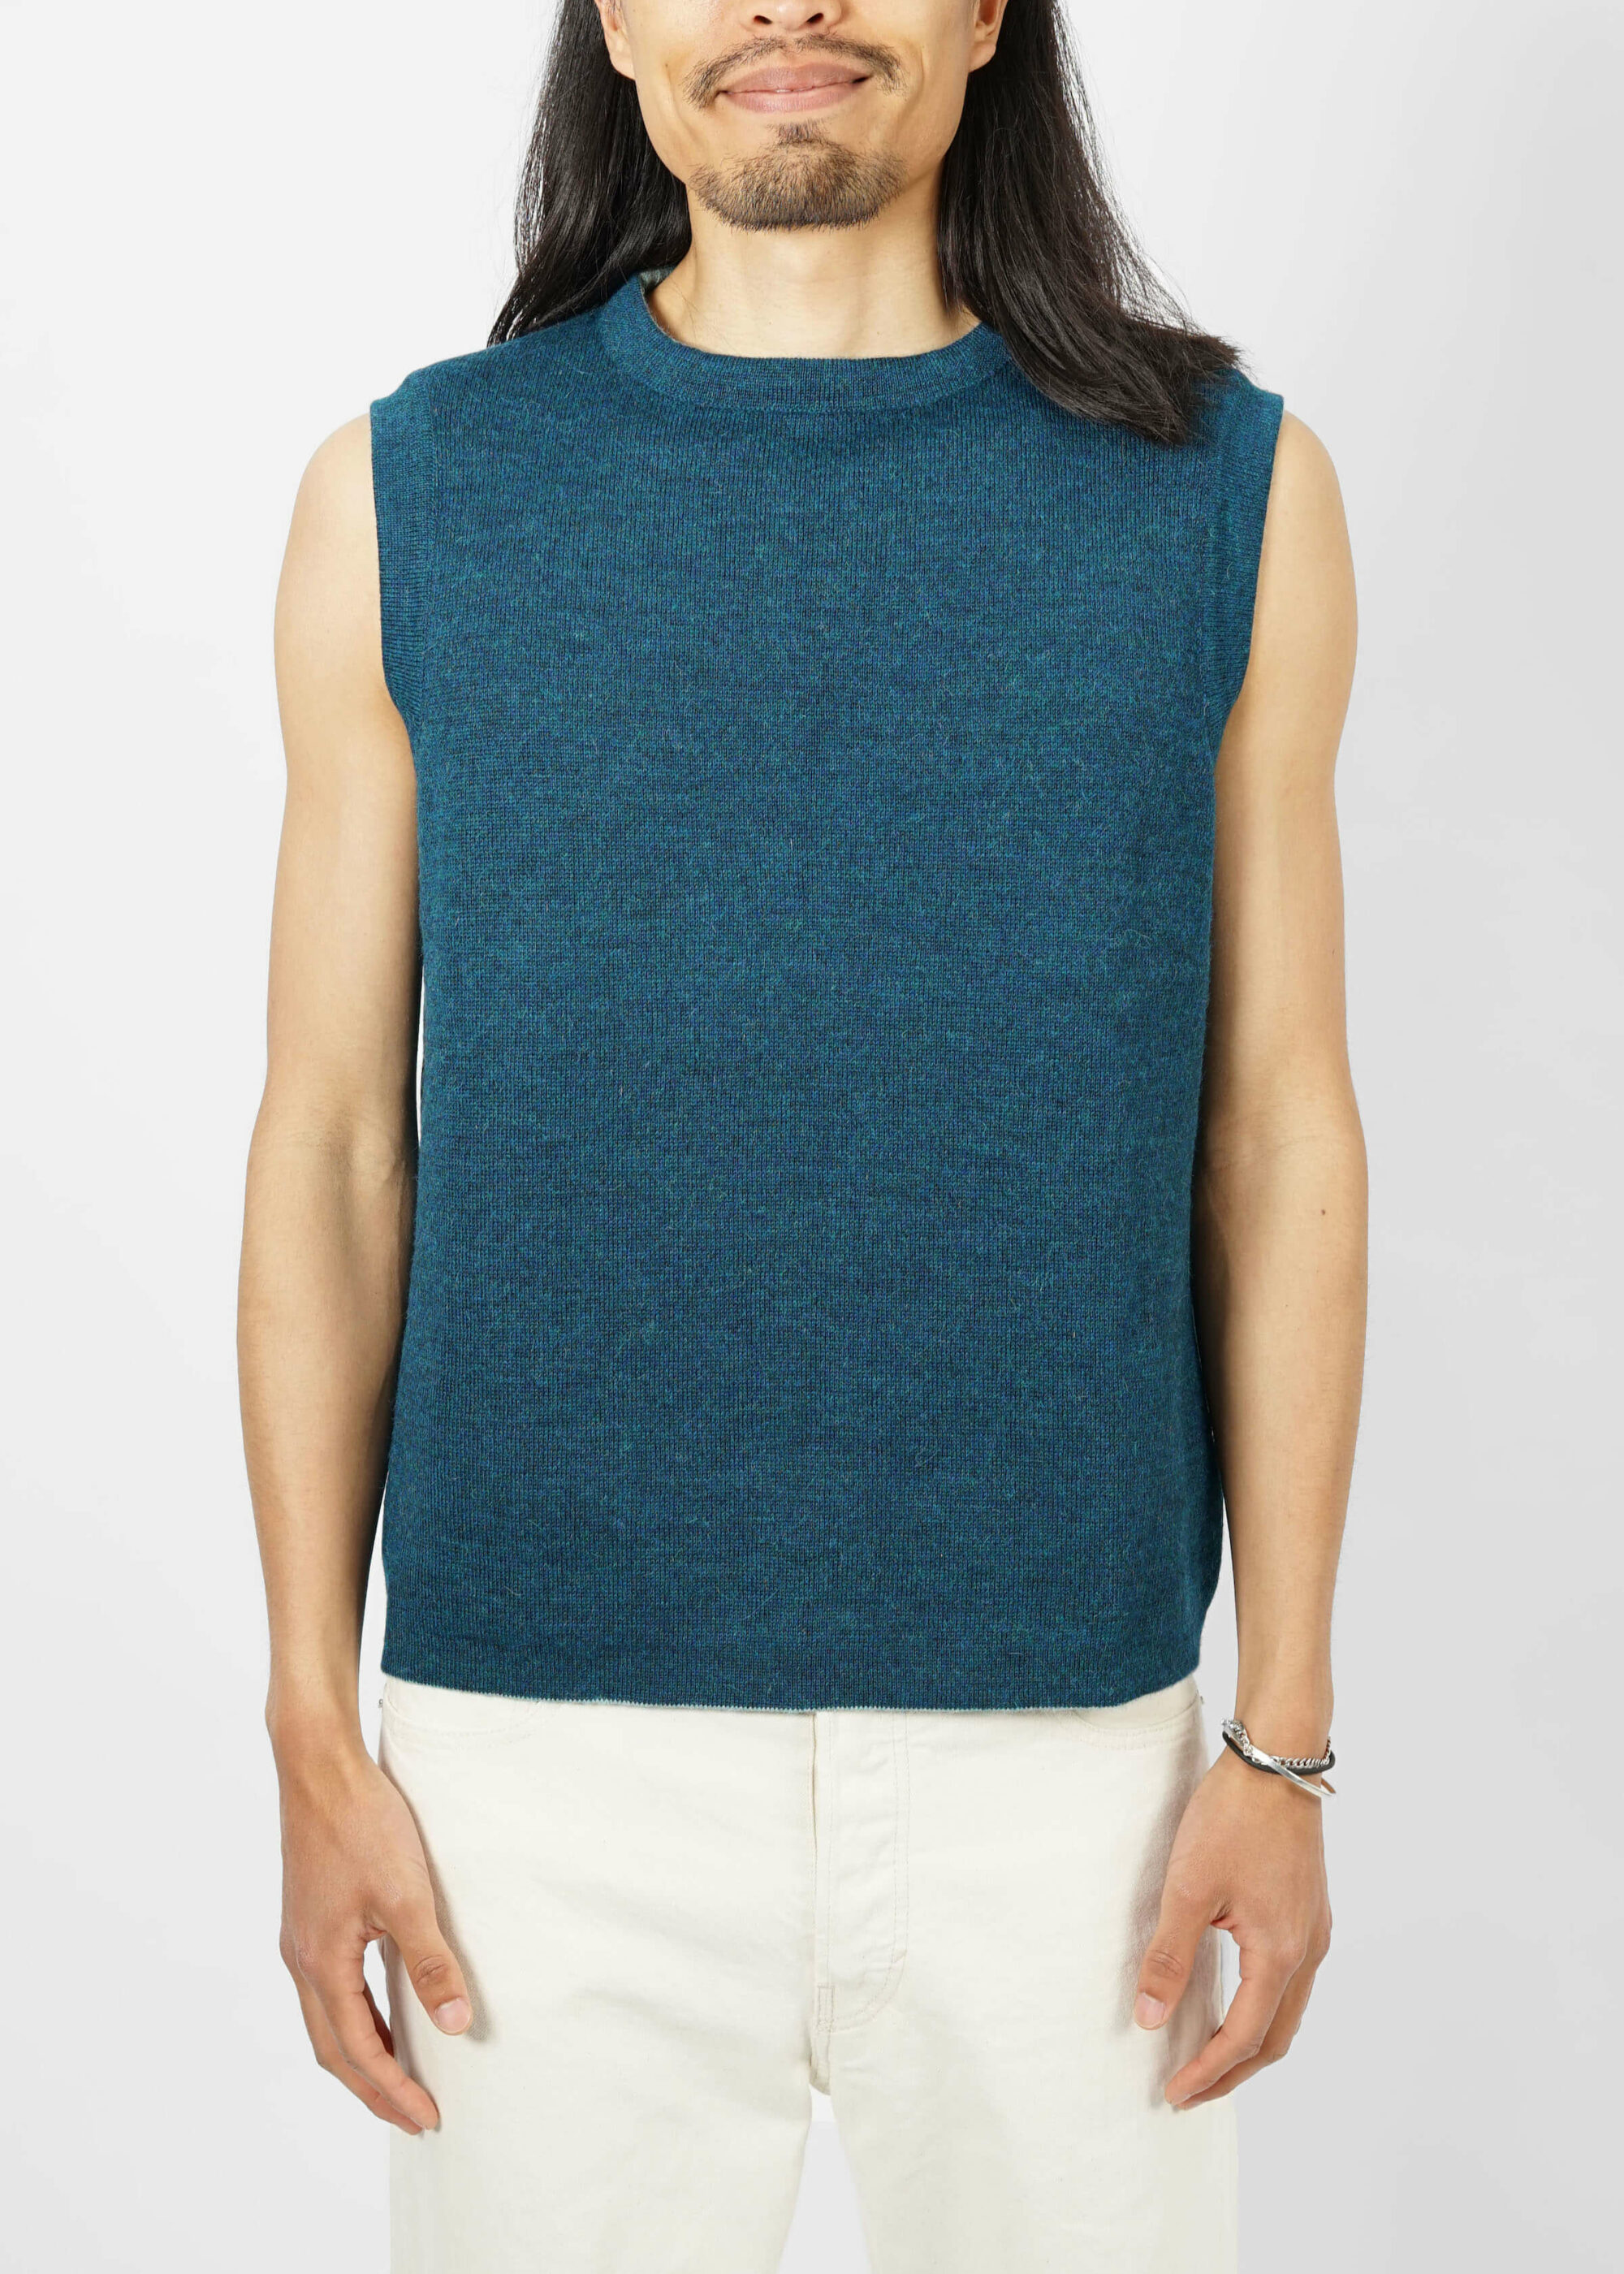 Product image for »Frei« Reversible Sweater Vest Baby Alpaca | Petrol Turquoise